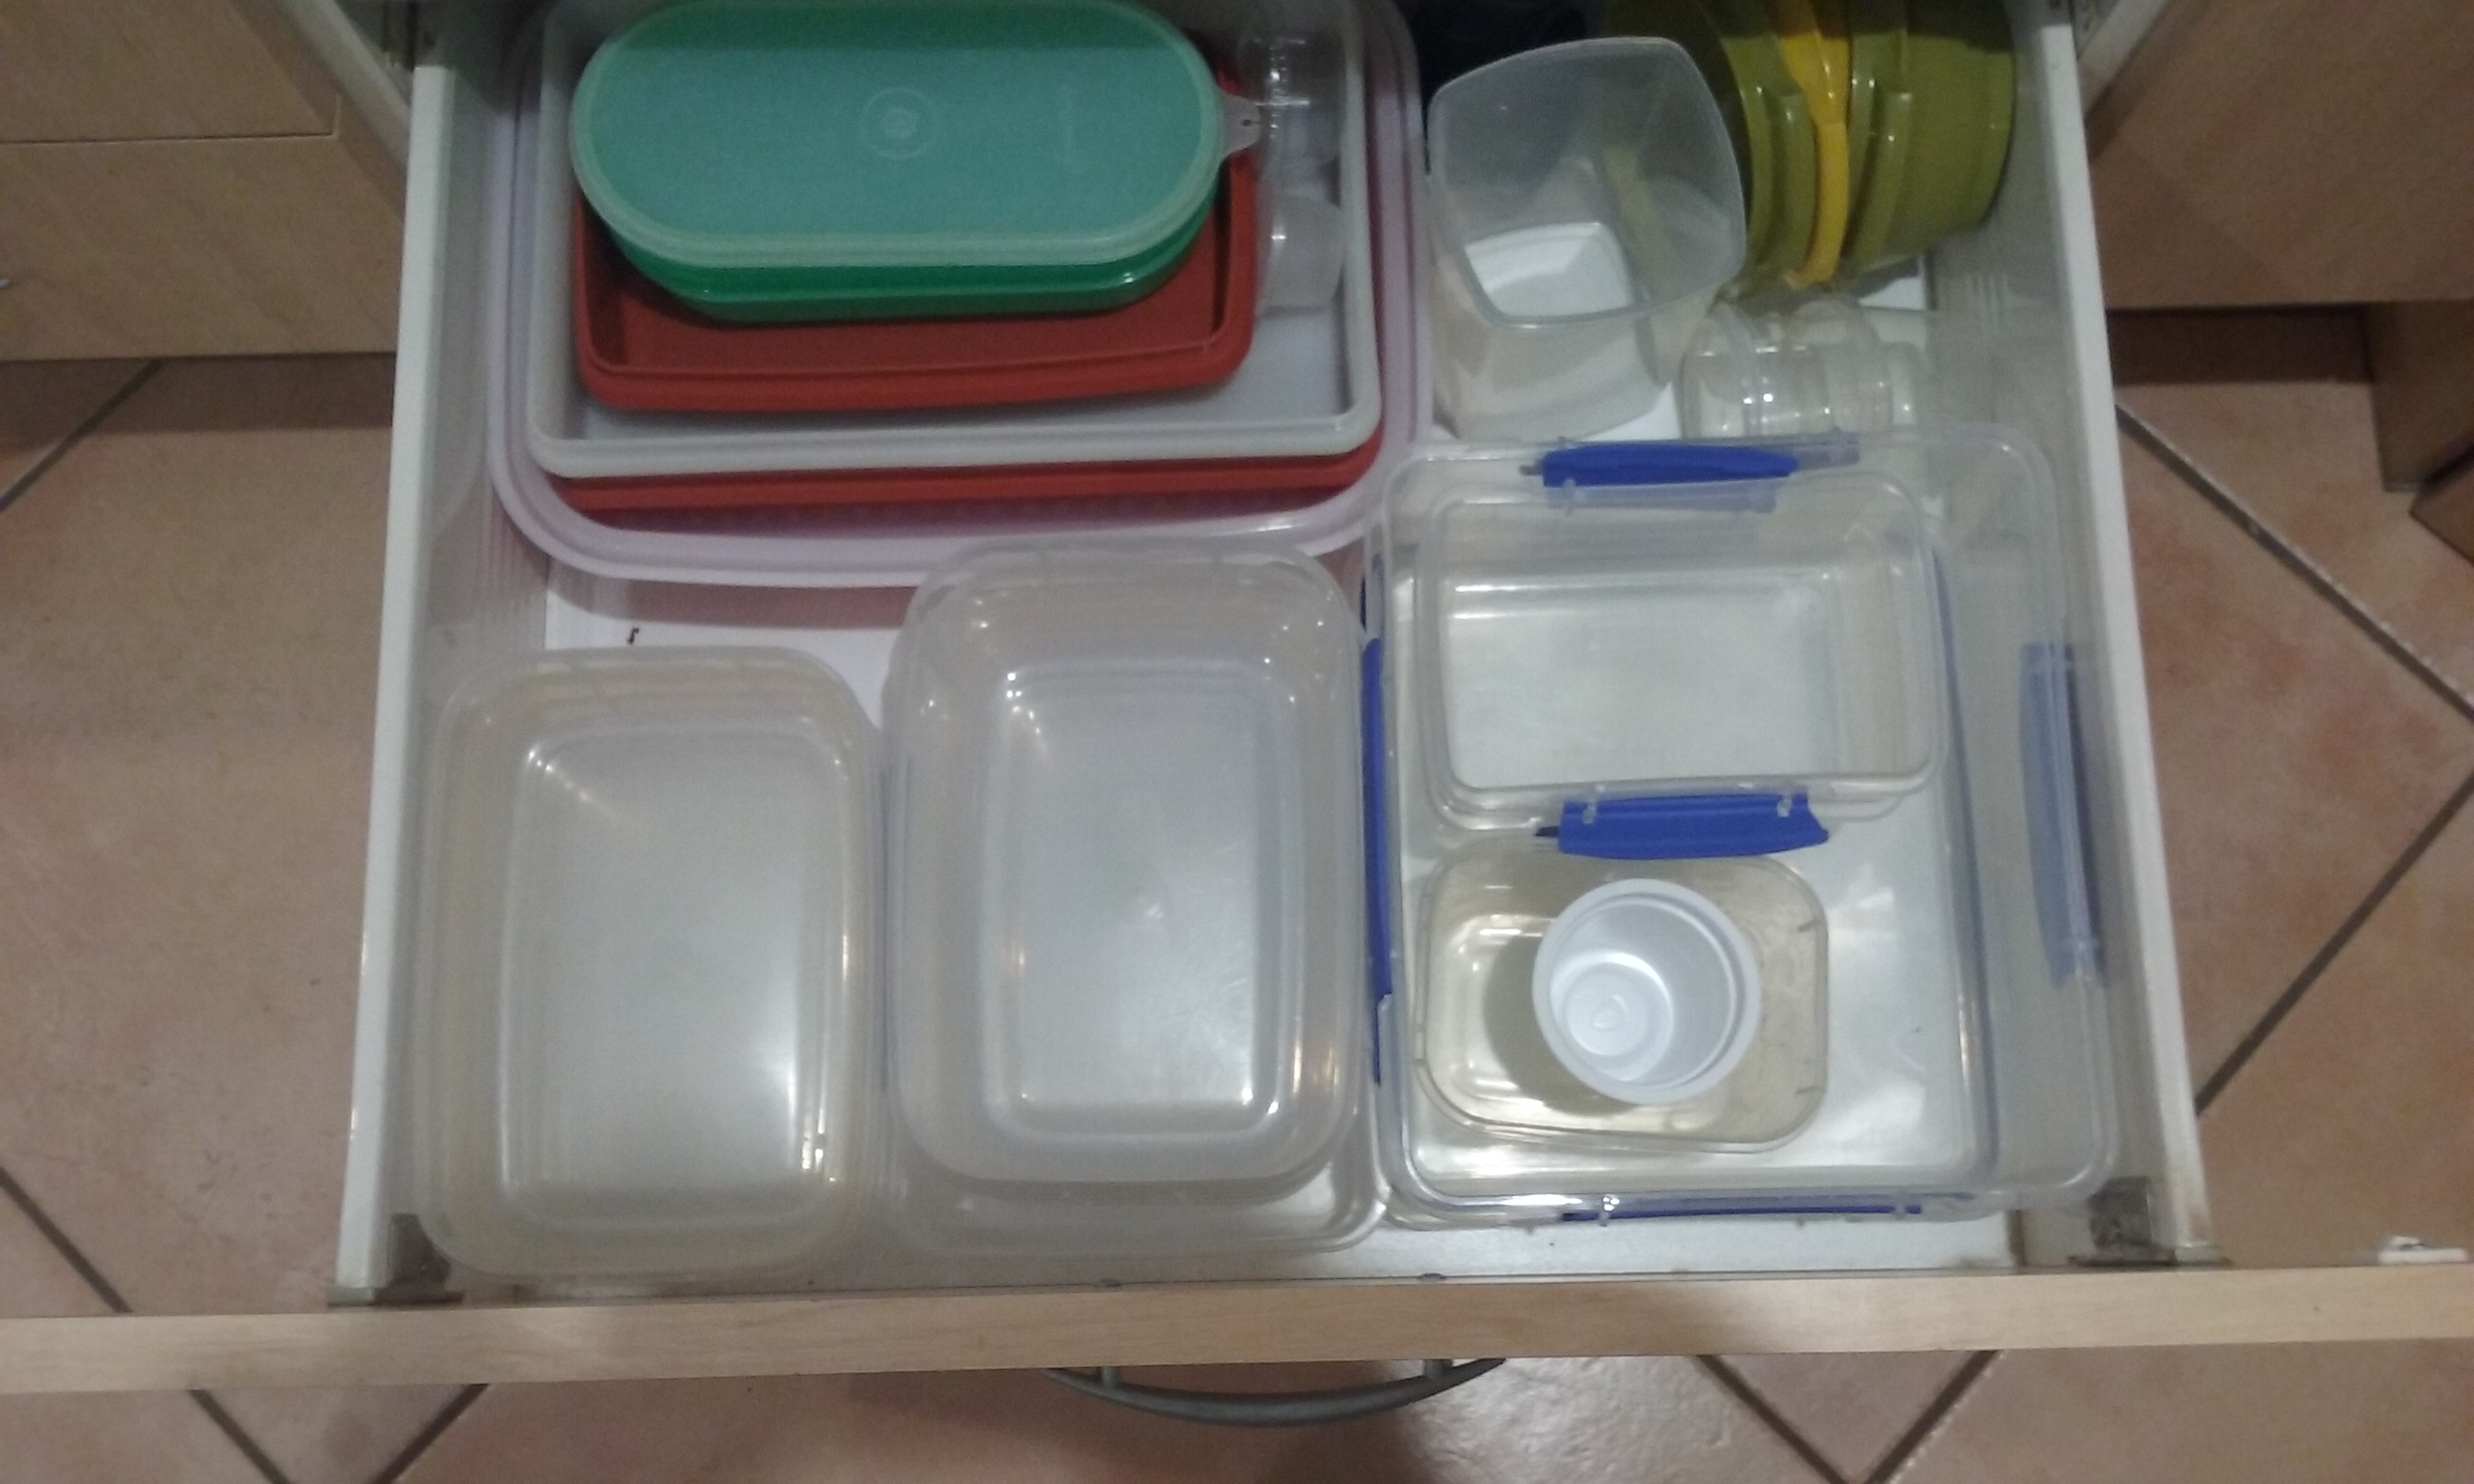 I haven't used these plastic tupperware containers since I swapped